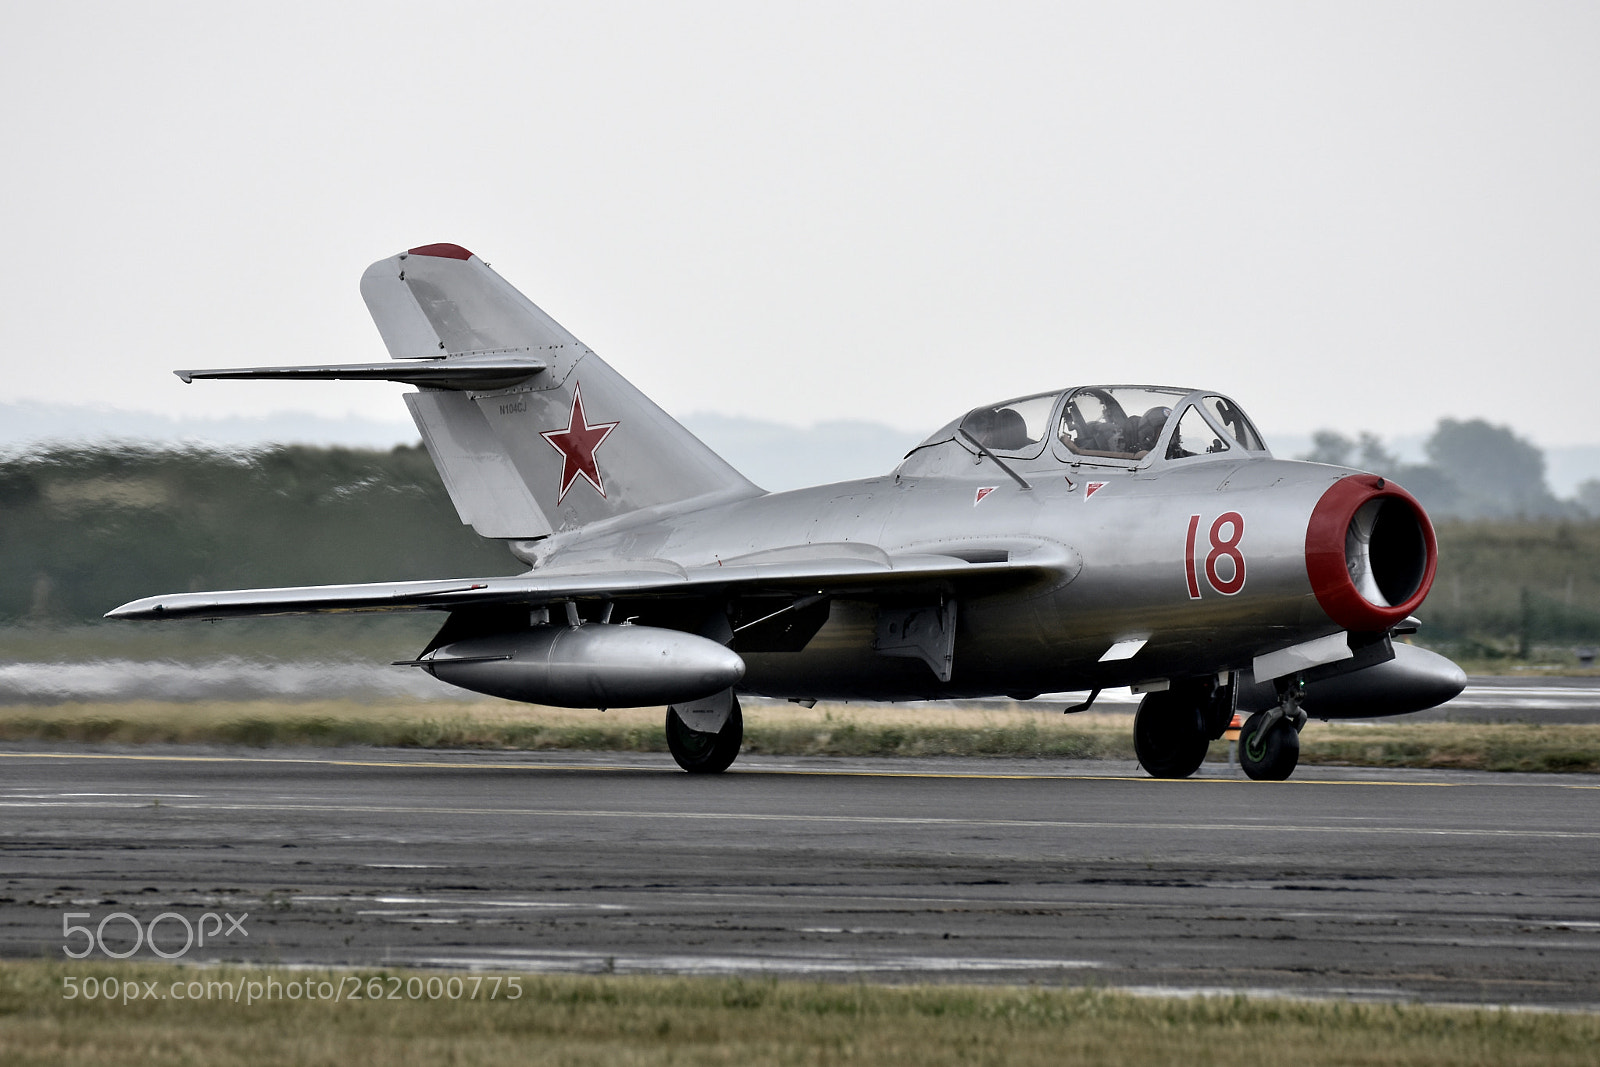 Sigma 150-600mm F5-6.3 DG OS HSM | C sample photo. Norwegian air force historic photography